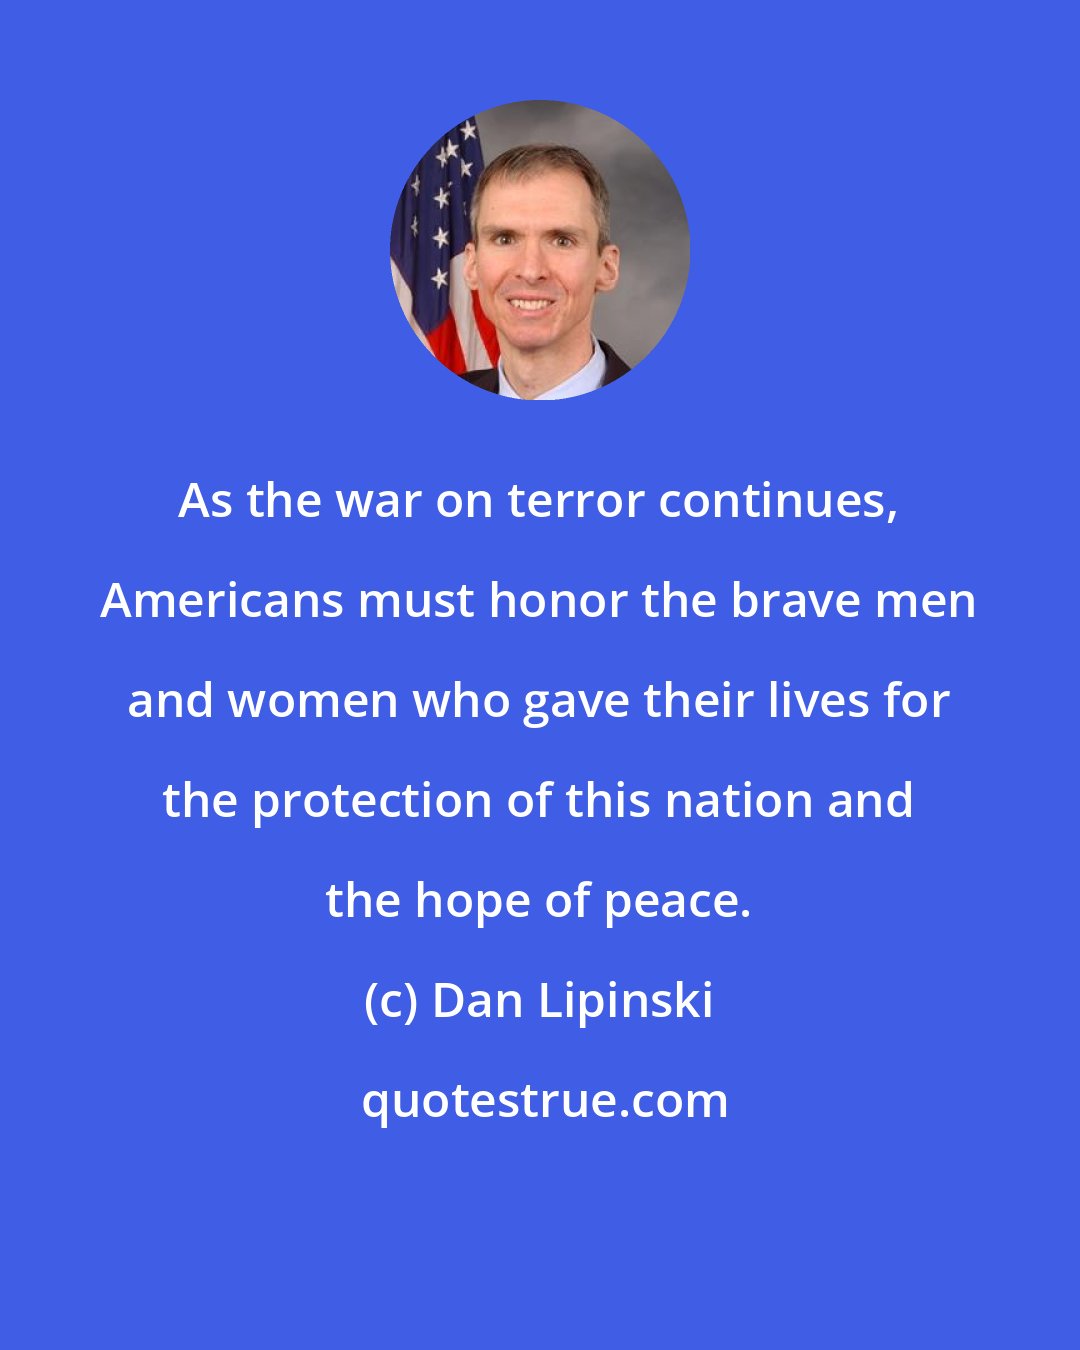 Dan Lipinski: As the war on terror continues, Americans must honor the brave men and women who gave their lives for the protection of this nation and the hope of peace.